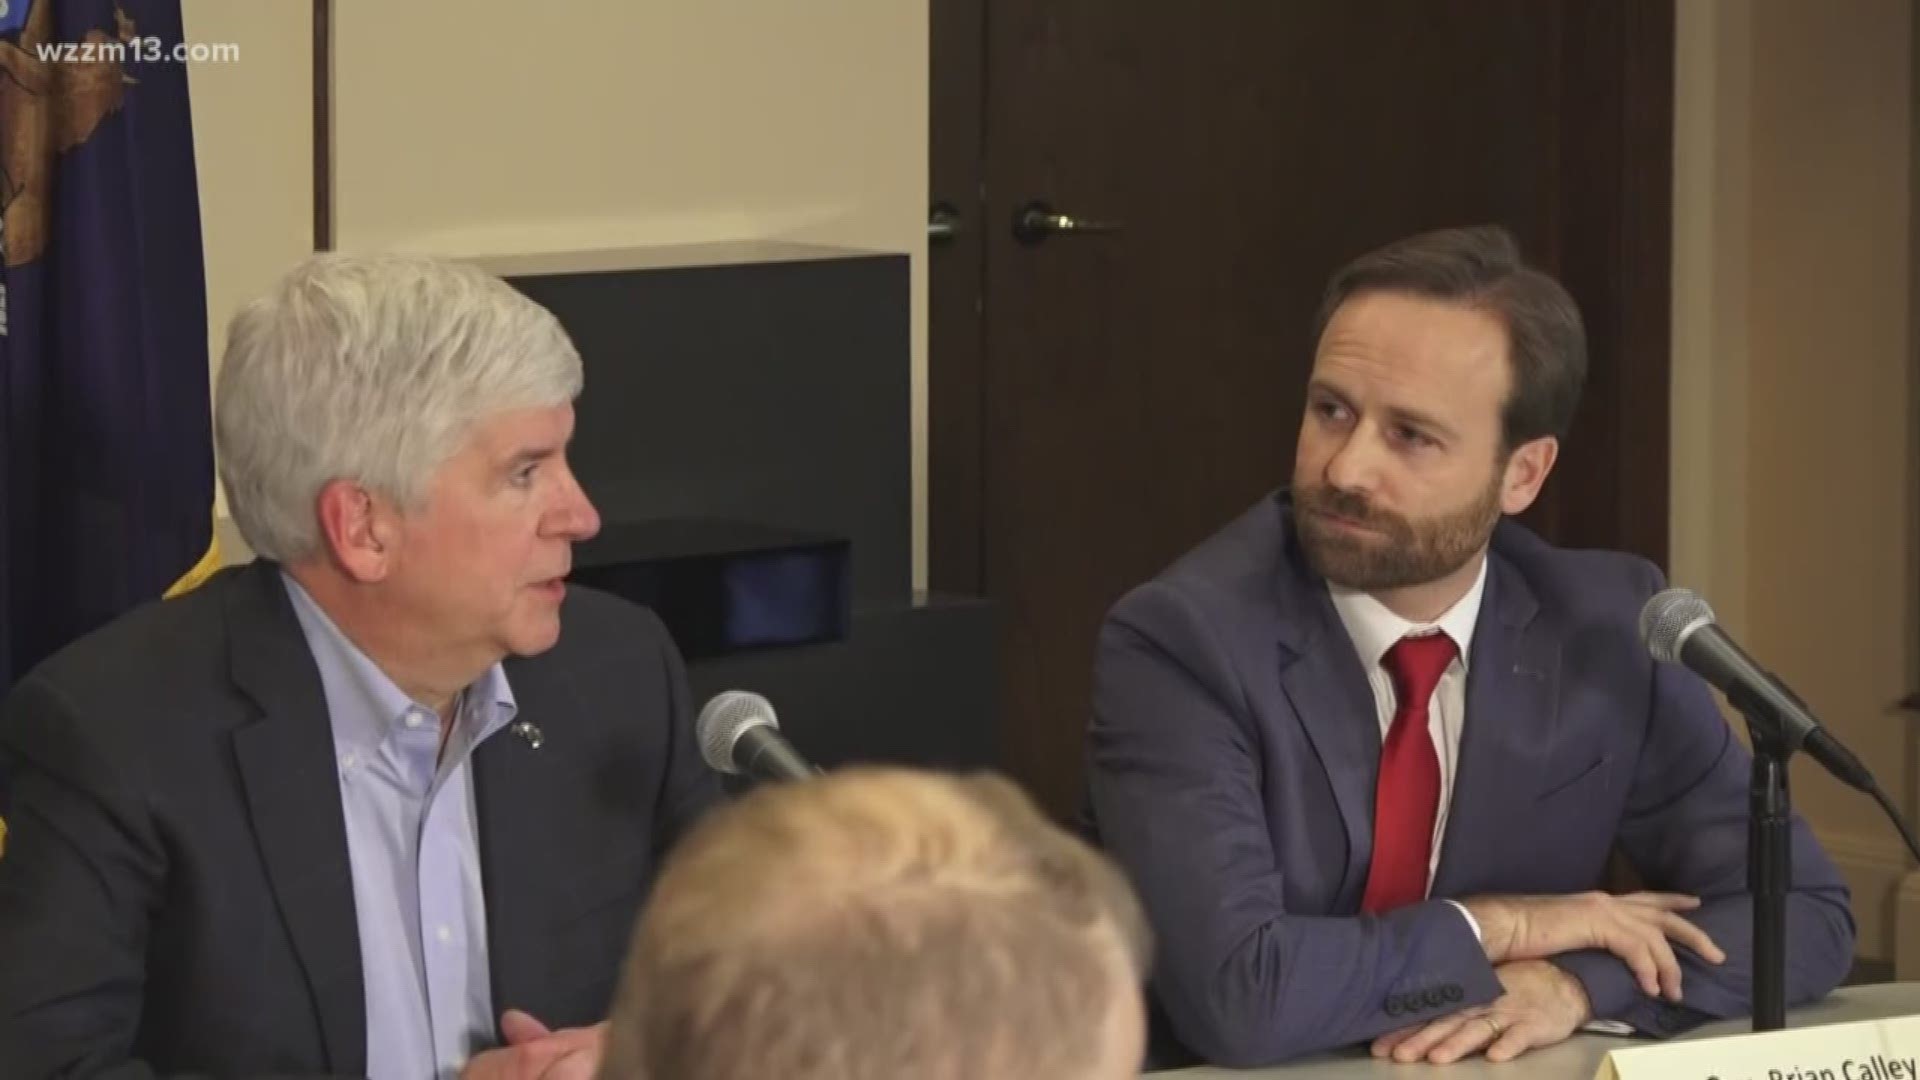 'I don't think about legacy,' Snyder says at round-table